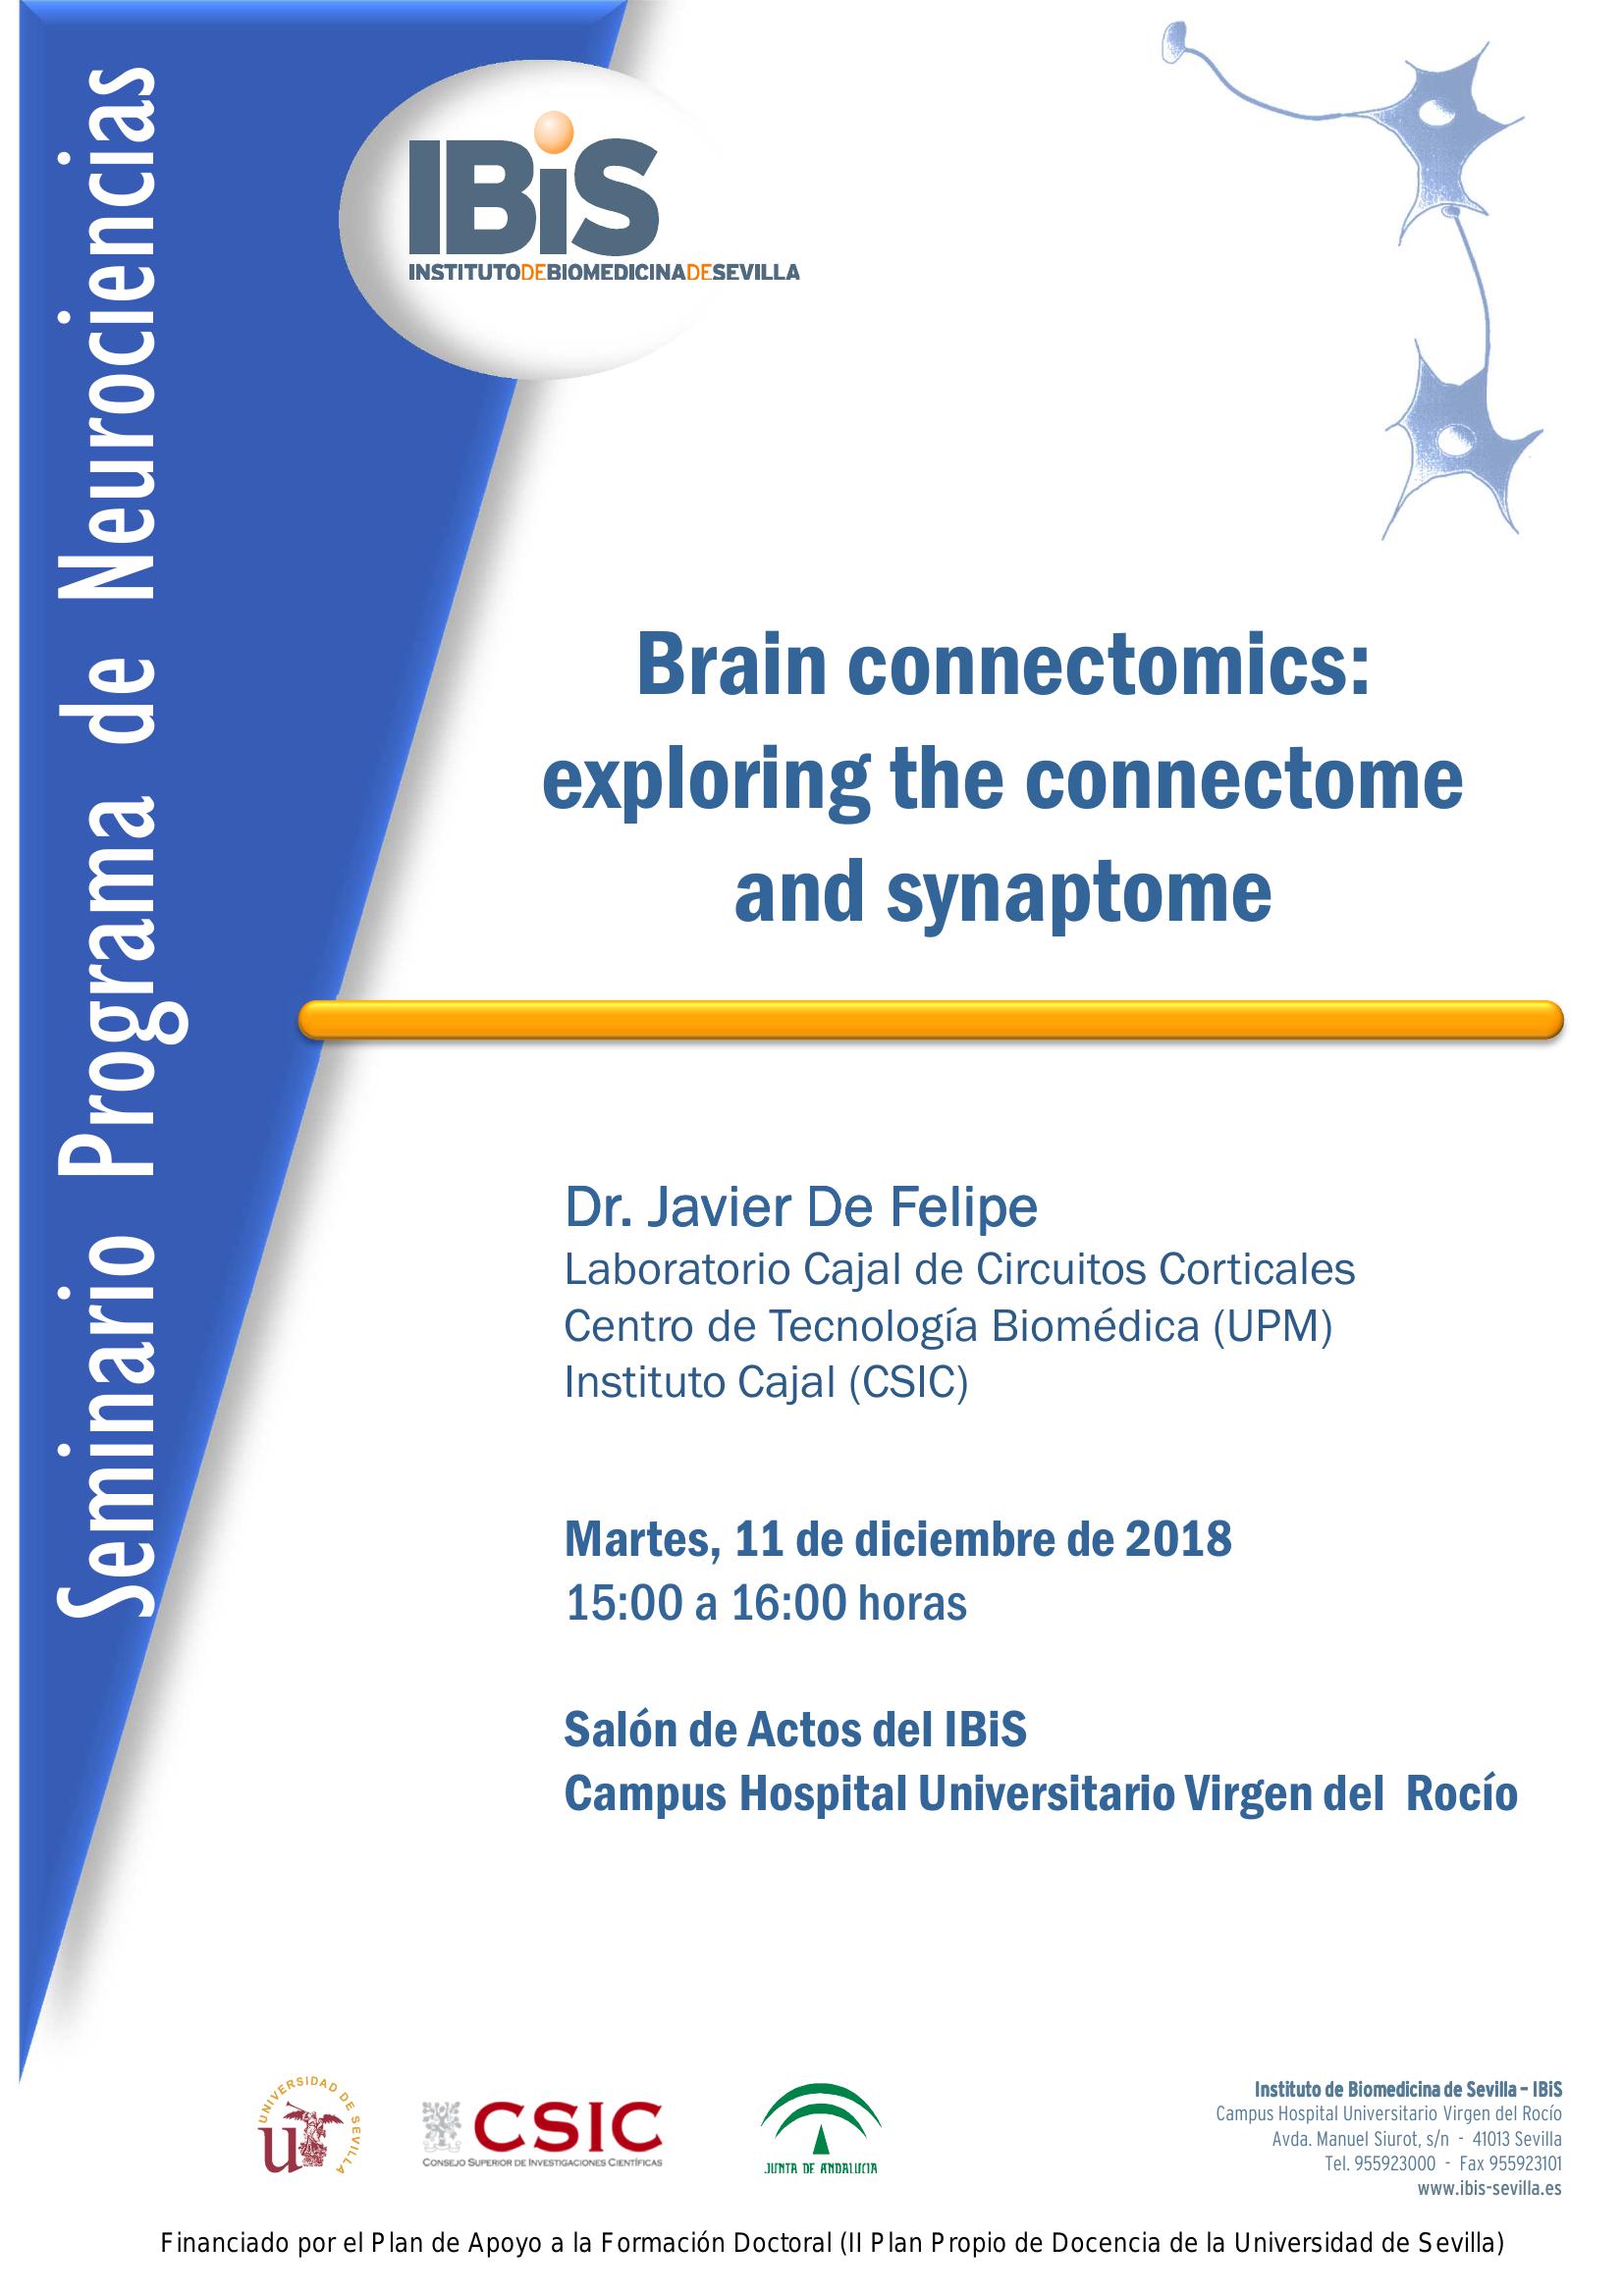 Poster: Brain connectomics: exploring the connectome and synaptome